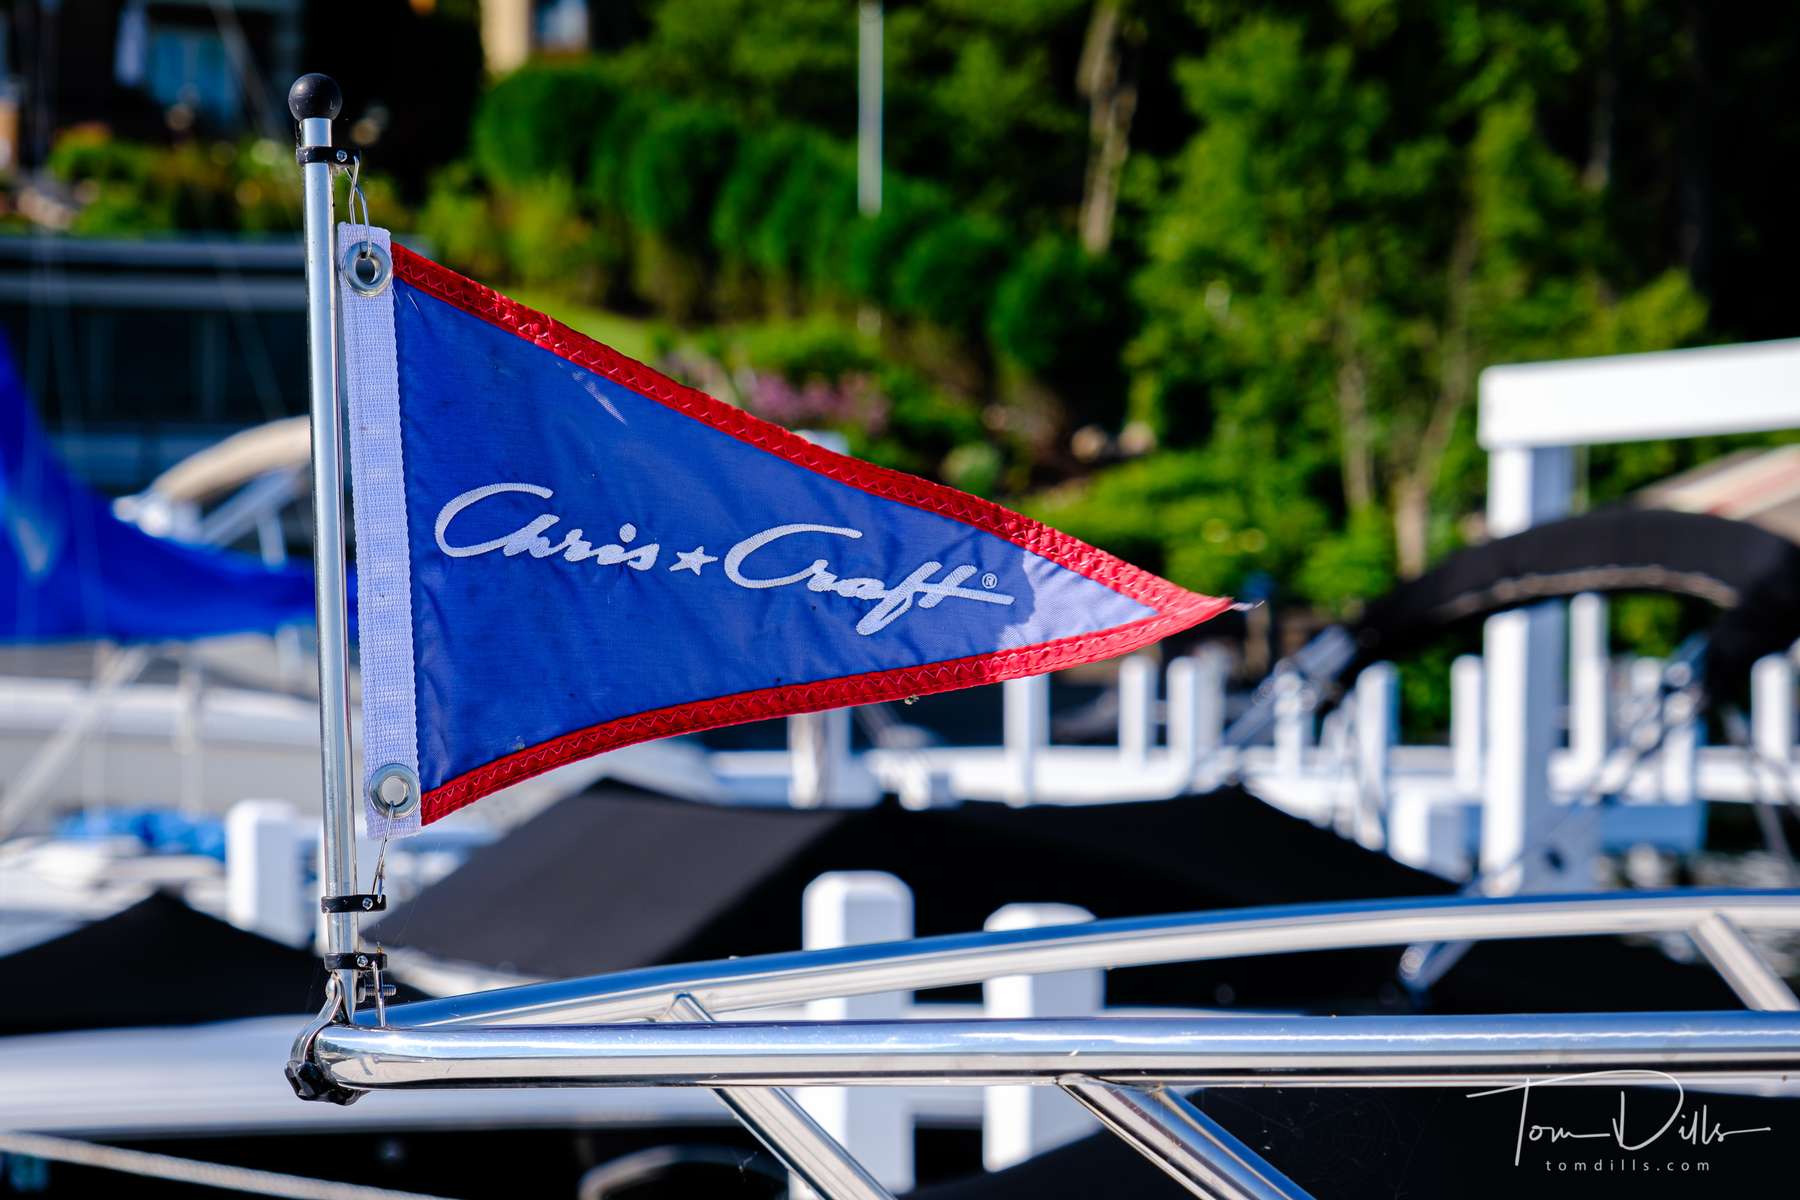 {quote}Chris Craft{quote} flag on a classic boat docked at the Geneva Inn, Lake Geneva, Wisconsin